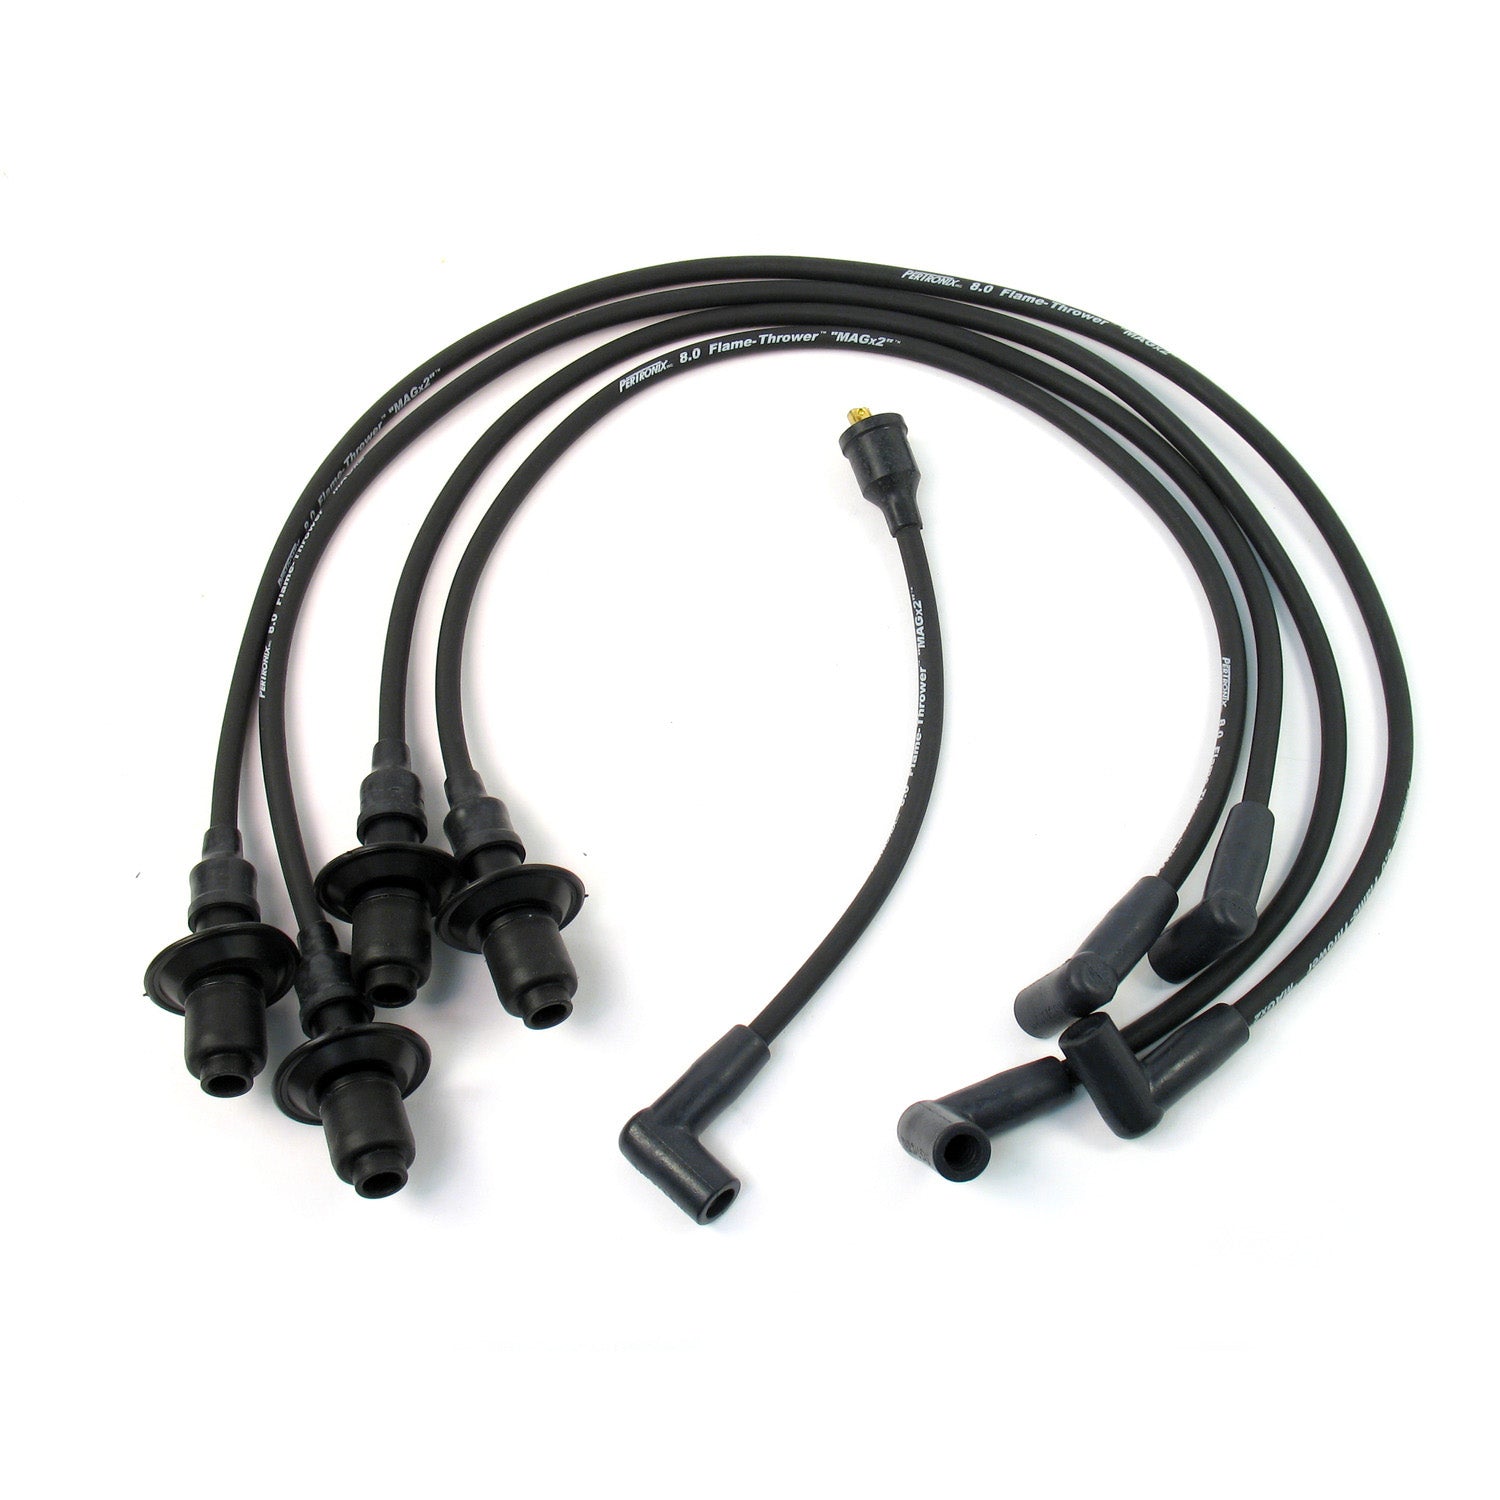 PerTronix 804202 Flame-Thrower Spark Plug Wires 4 cyl 8mm VW Male Cap Black